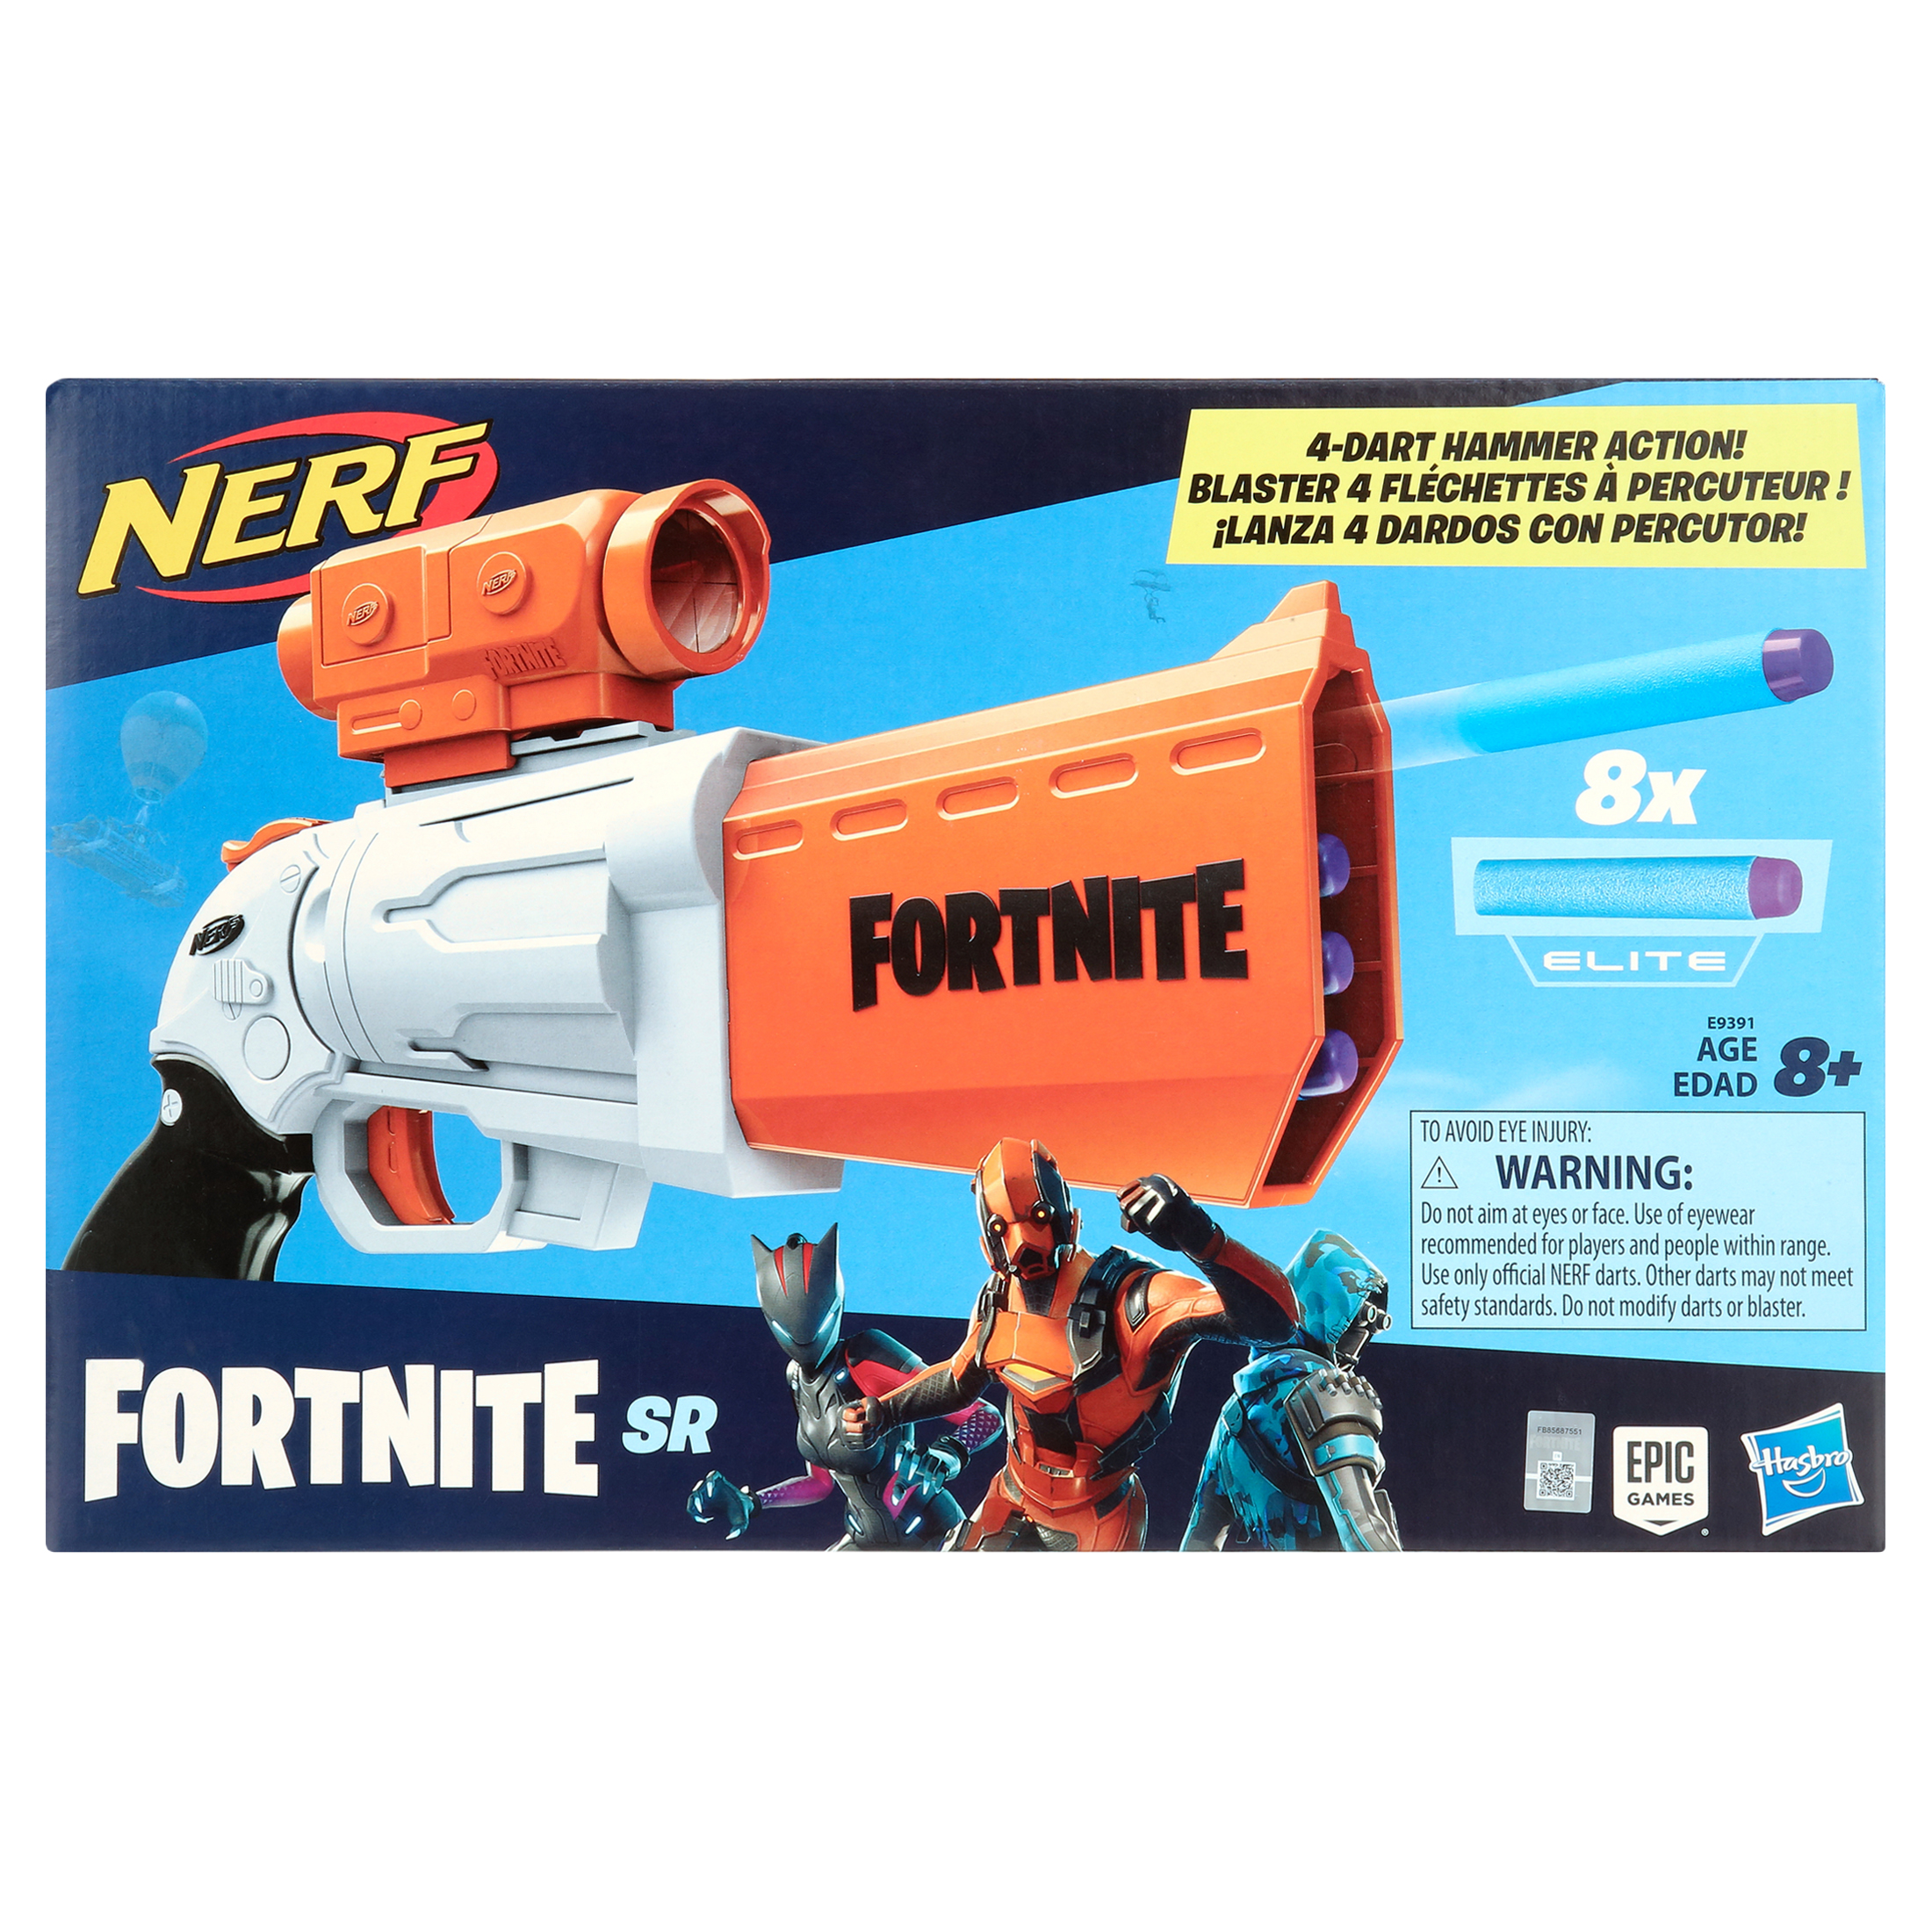 Nerf Fortnite SR Blaster, Includes 8 Official Nerf Darts, for Kids Ages 8 and Up - image 3 of 7